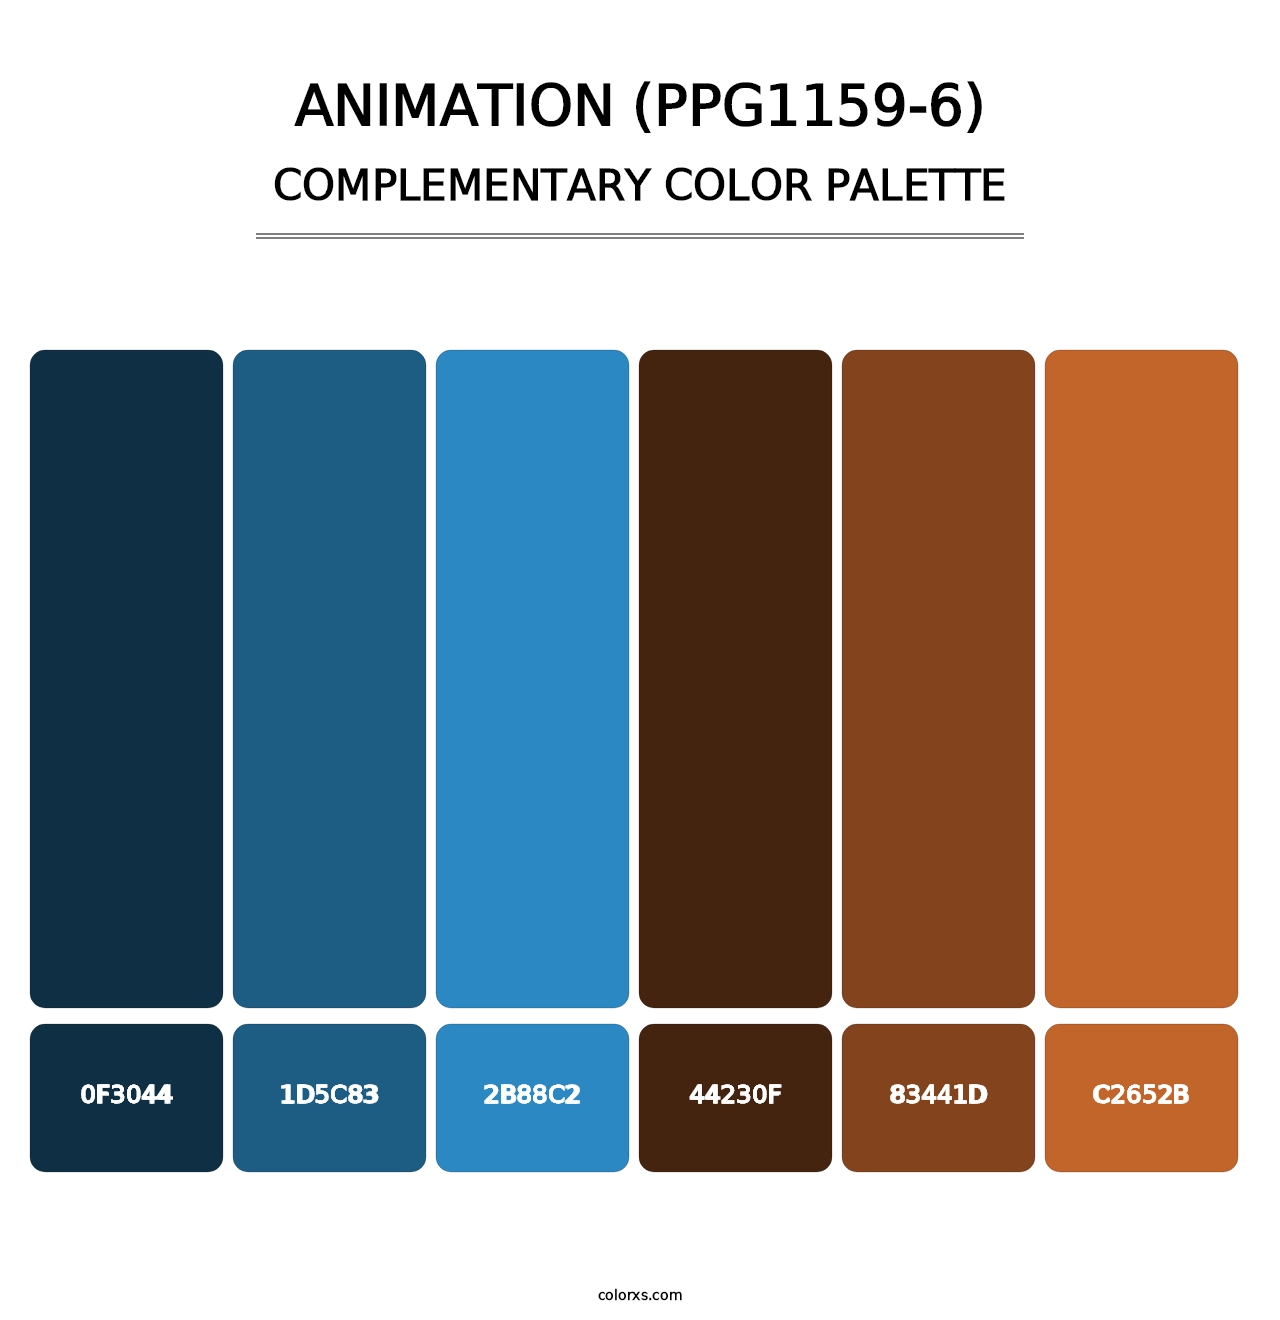 Animation (PPG1159-6) - Complementary Color Palette